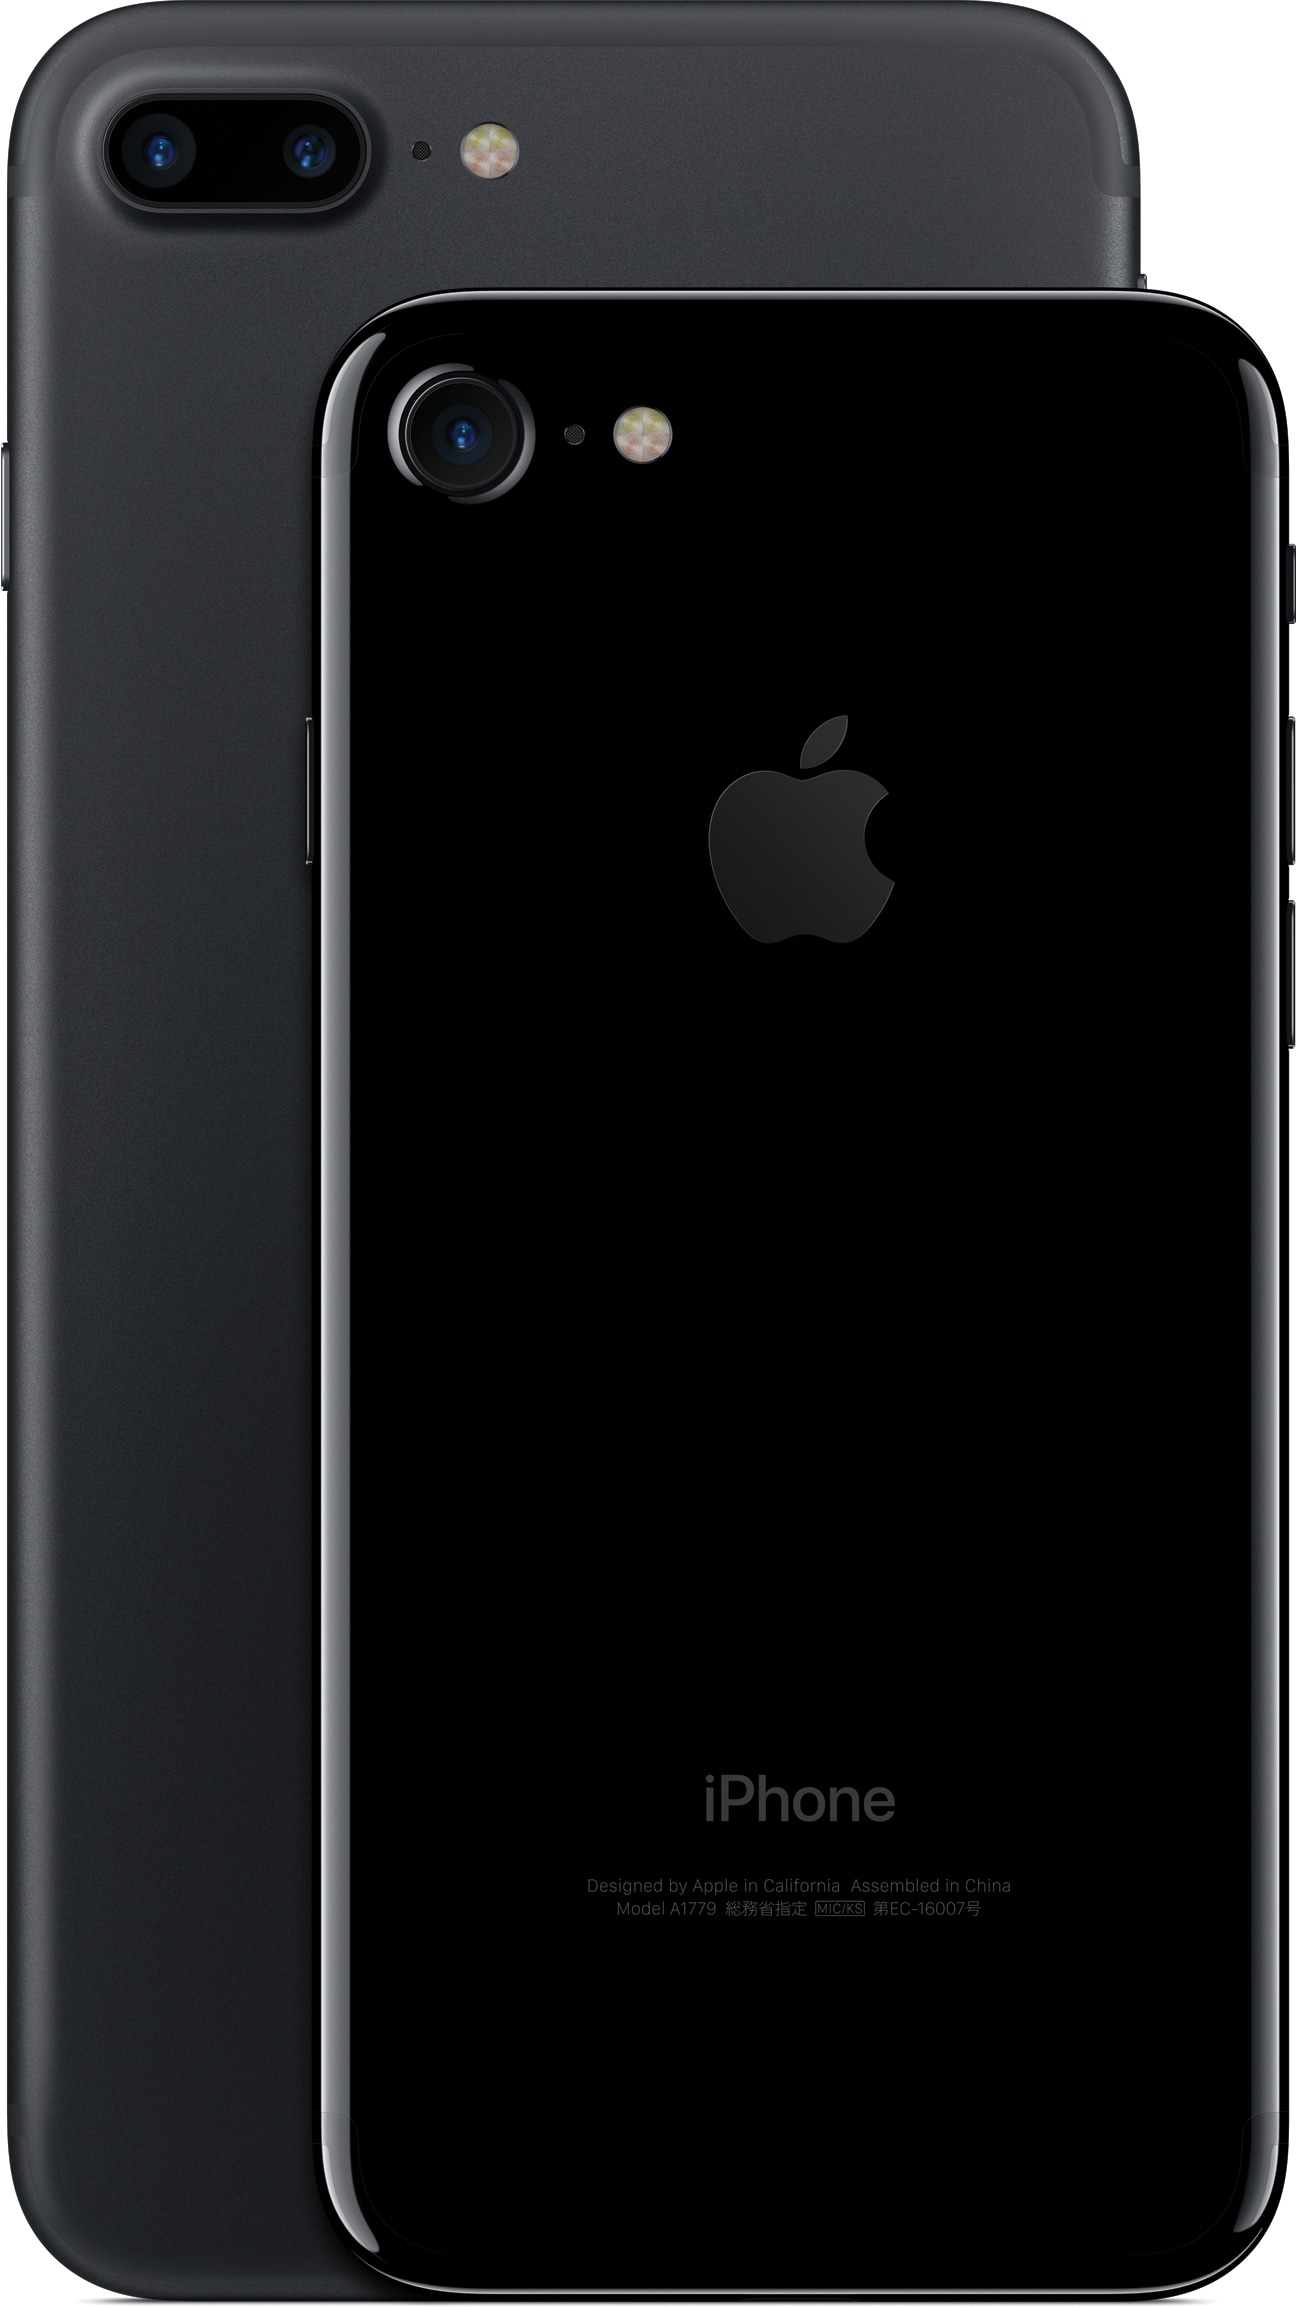 iPhone 7 Plus black on the back and iPhone 7 jet black on the back